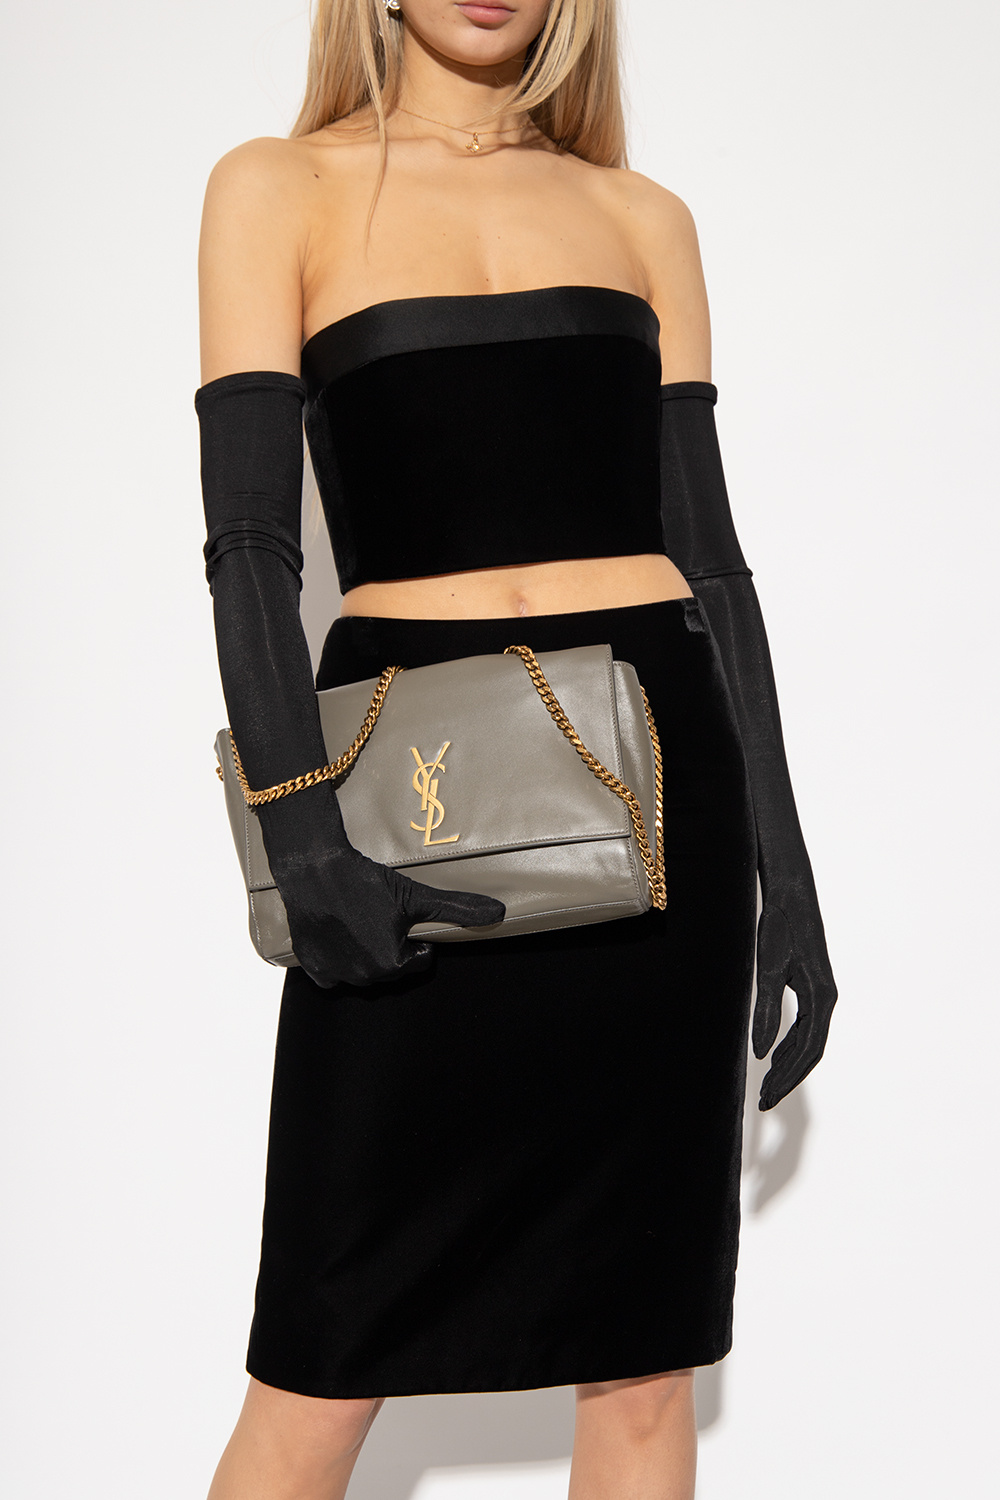 Saint Laurent Kate Medium Reversible Chain Bag in Suede and Leather